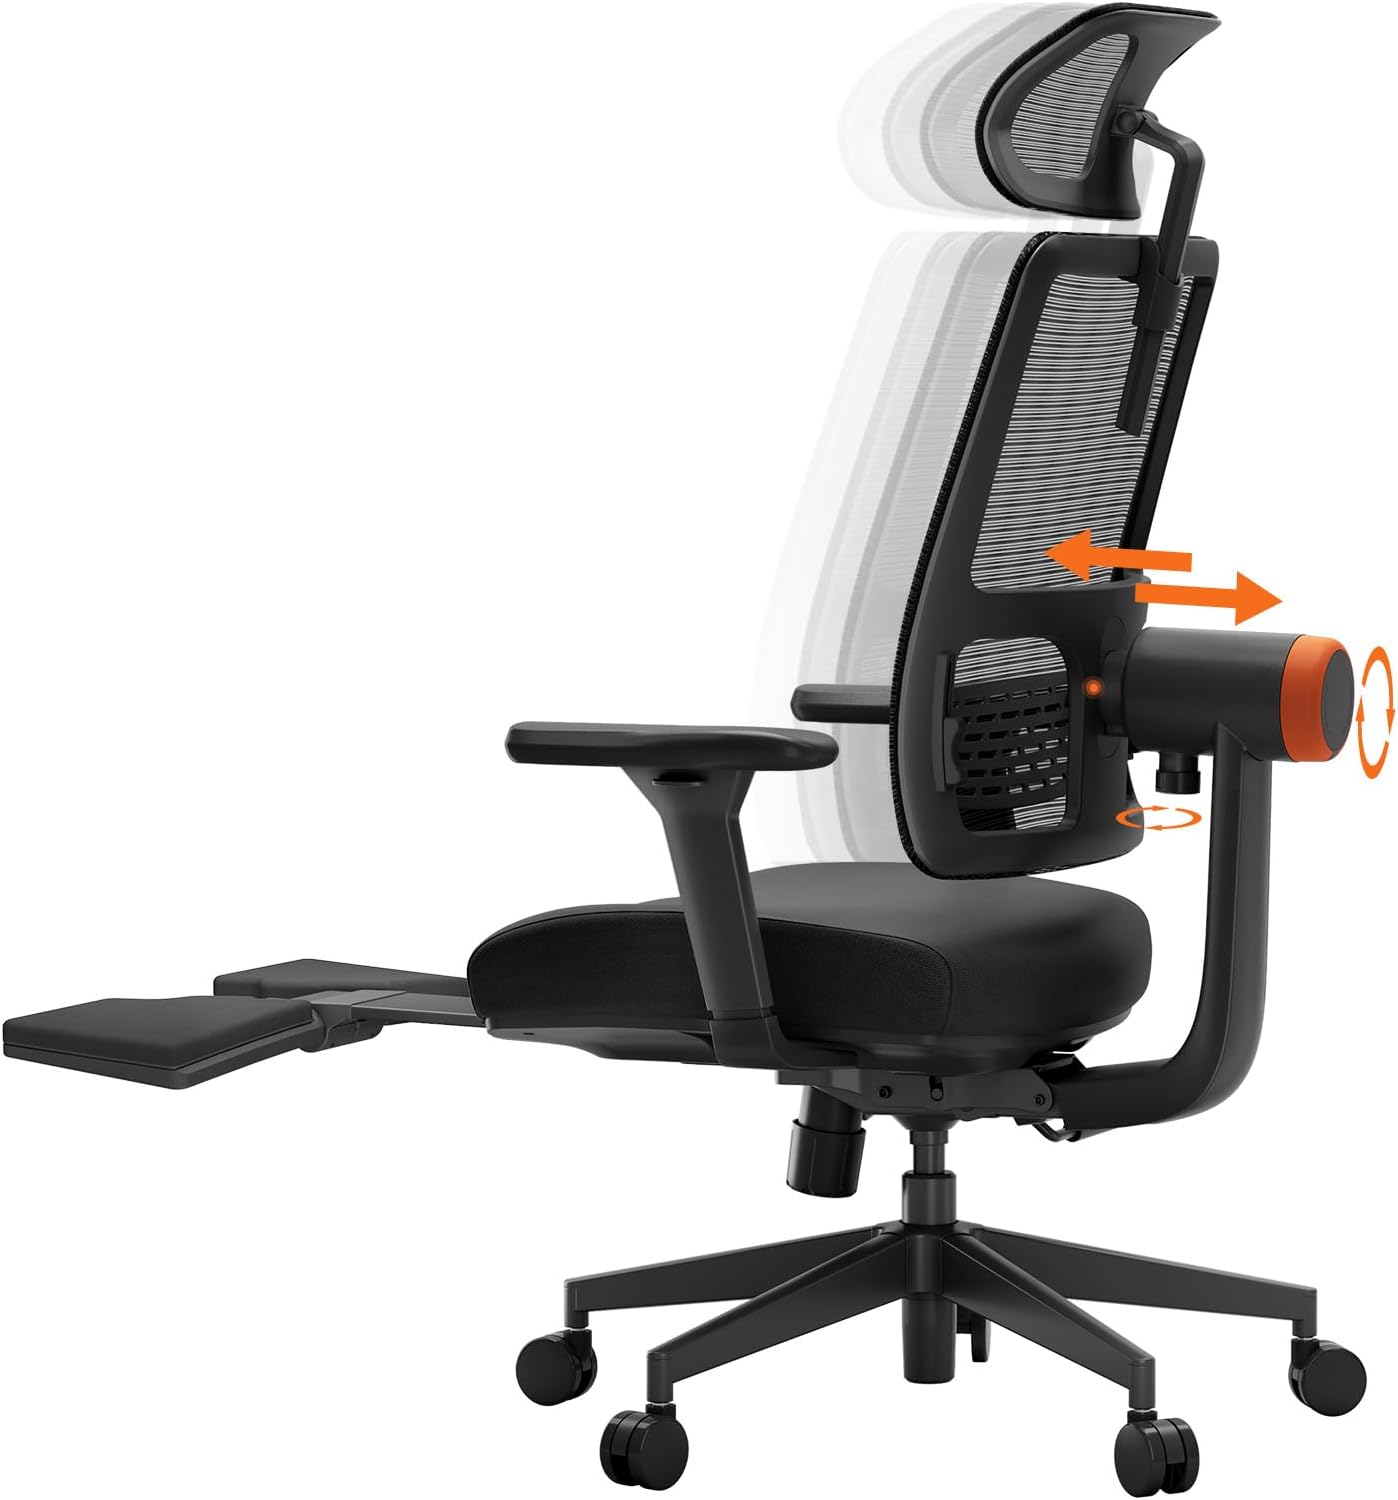 Newtral Ergonomic Chair with Footrest - Home Office Desk Chair with Auto-Following Lumbar Support, 4D Armrest, Seat Depth & Height Adjustable, 96-136 Reclines